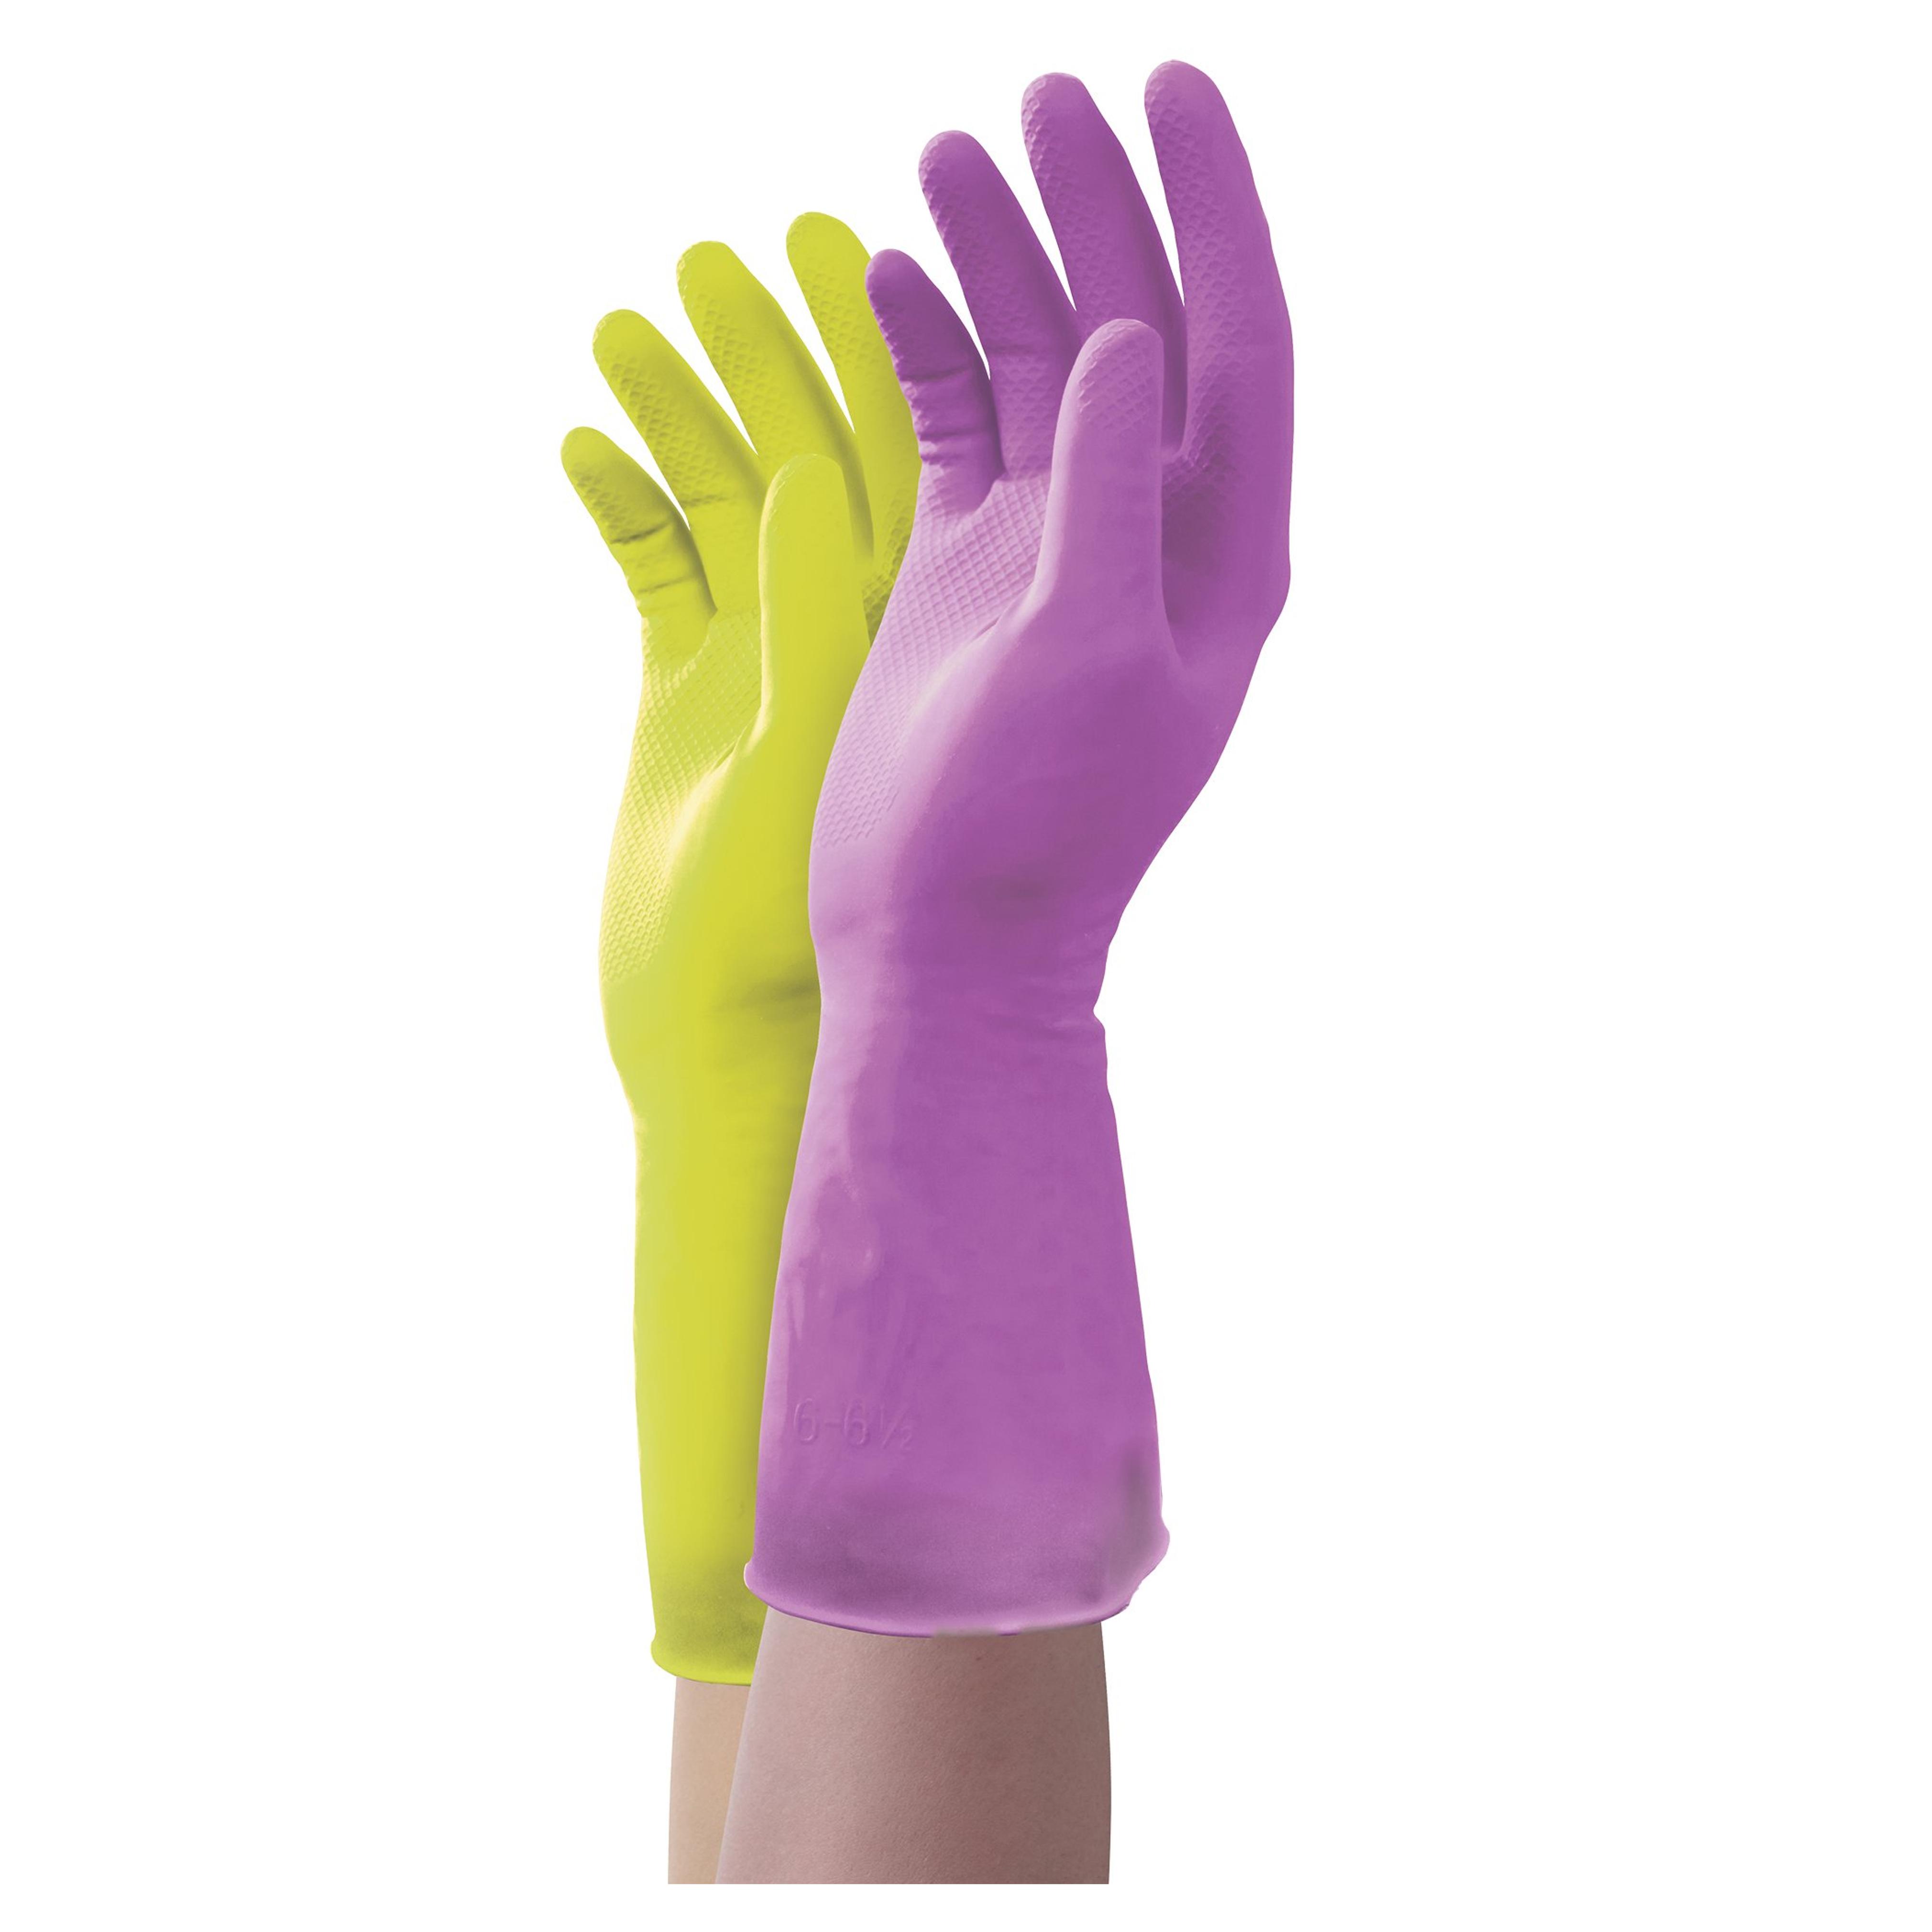 Amazon.com: Mr. Clean Duet, Natural Latex, Beaded Cuff, Cotton Flock Lining, Non-Slip Grip Gloves, Large : Health & Household